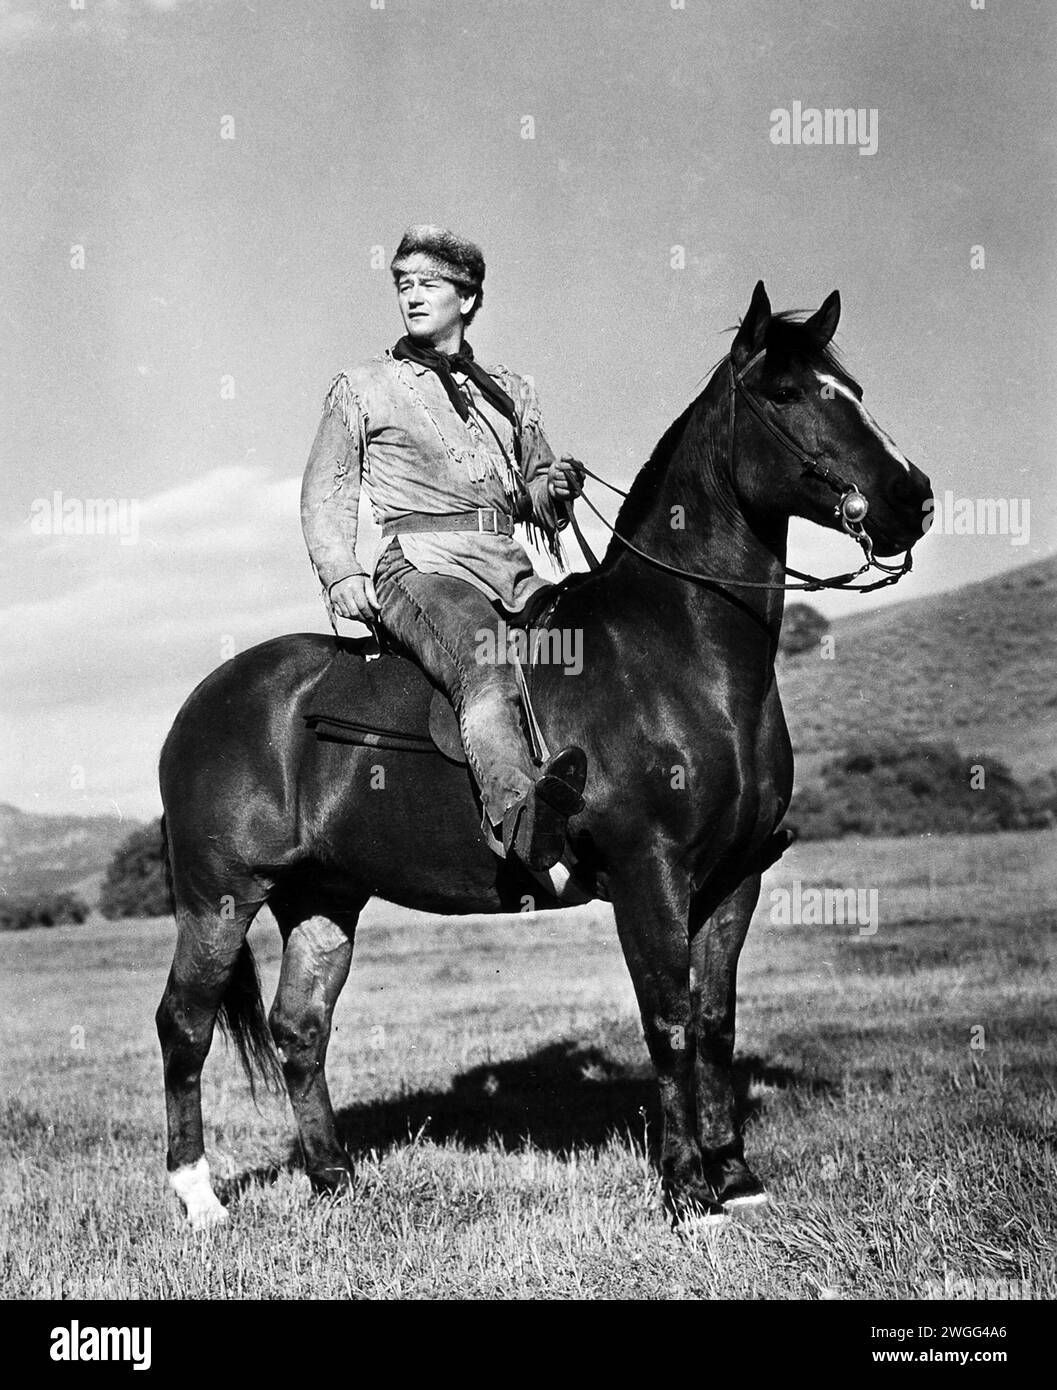 John Wayne on a horse, publicity photo 1940s, western outfit Stock Photo